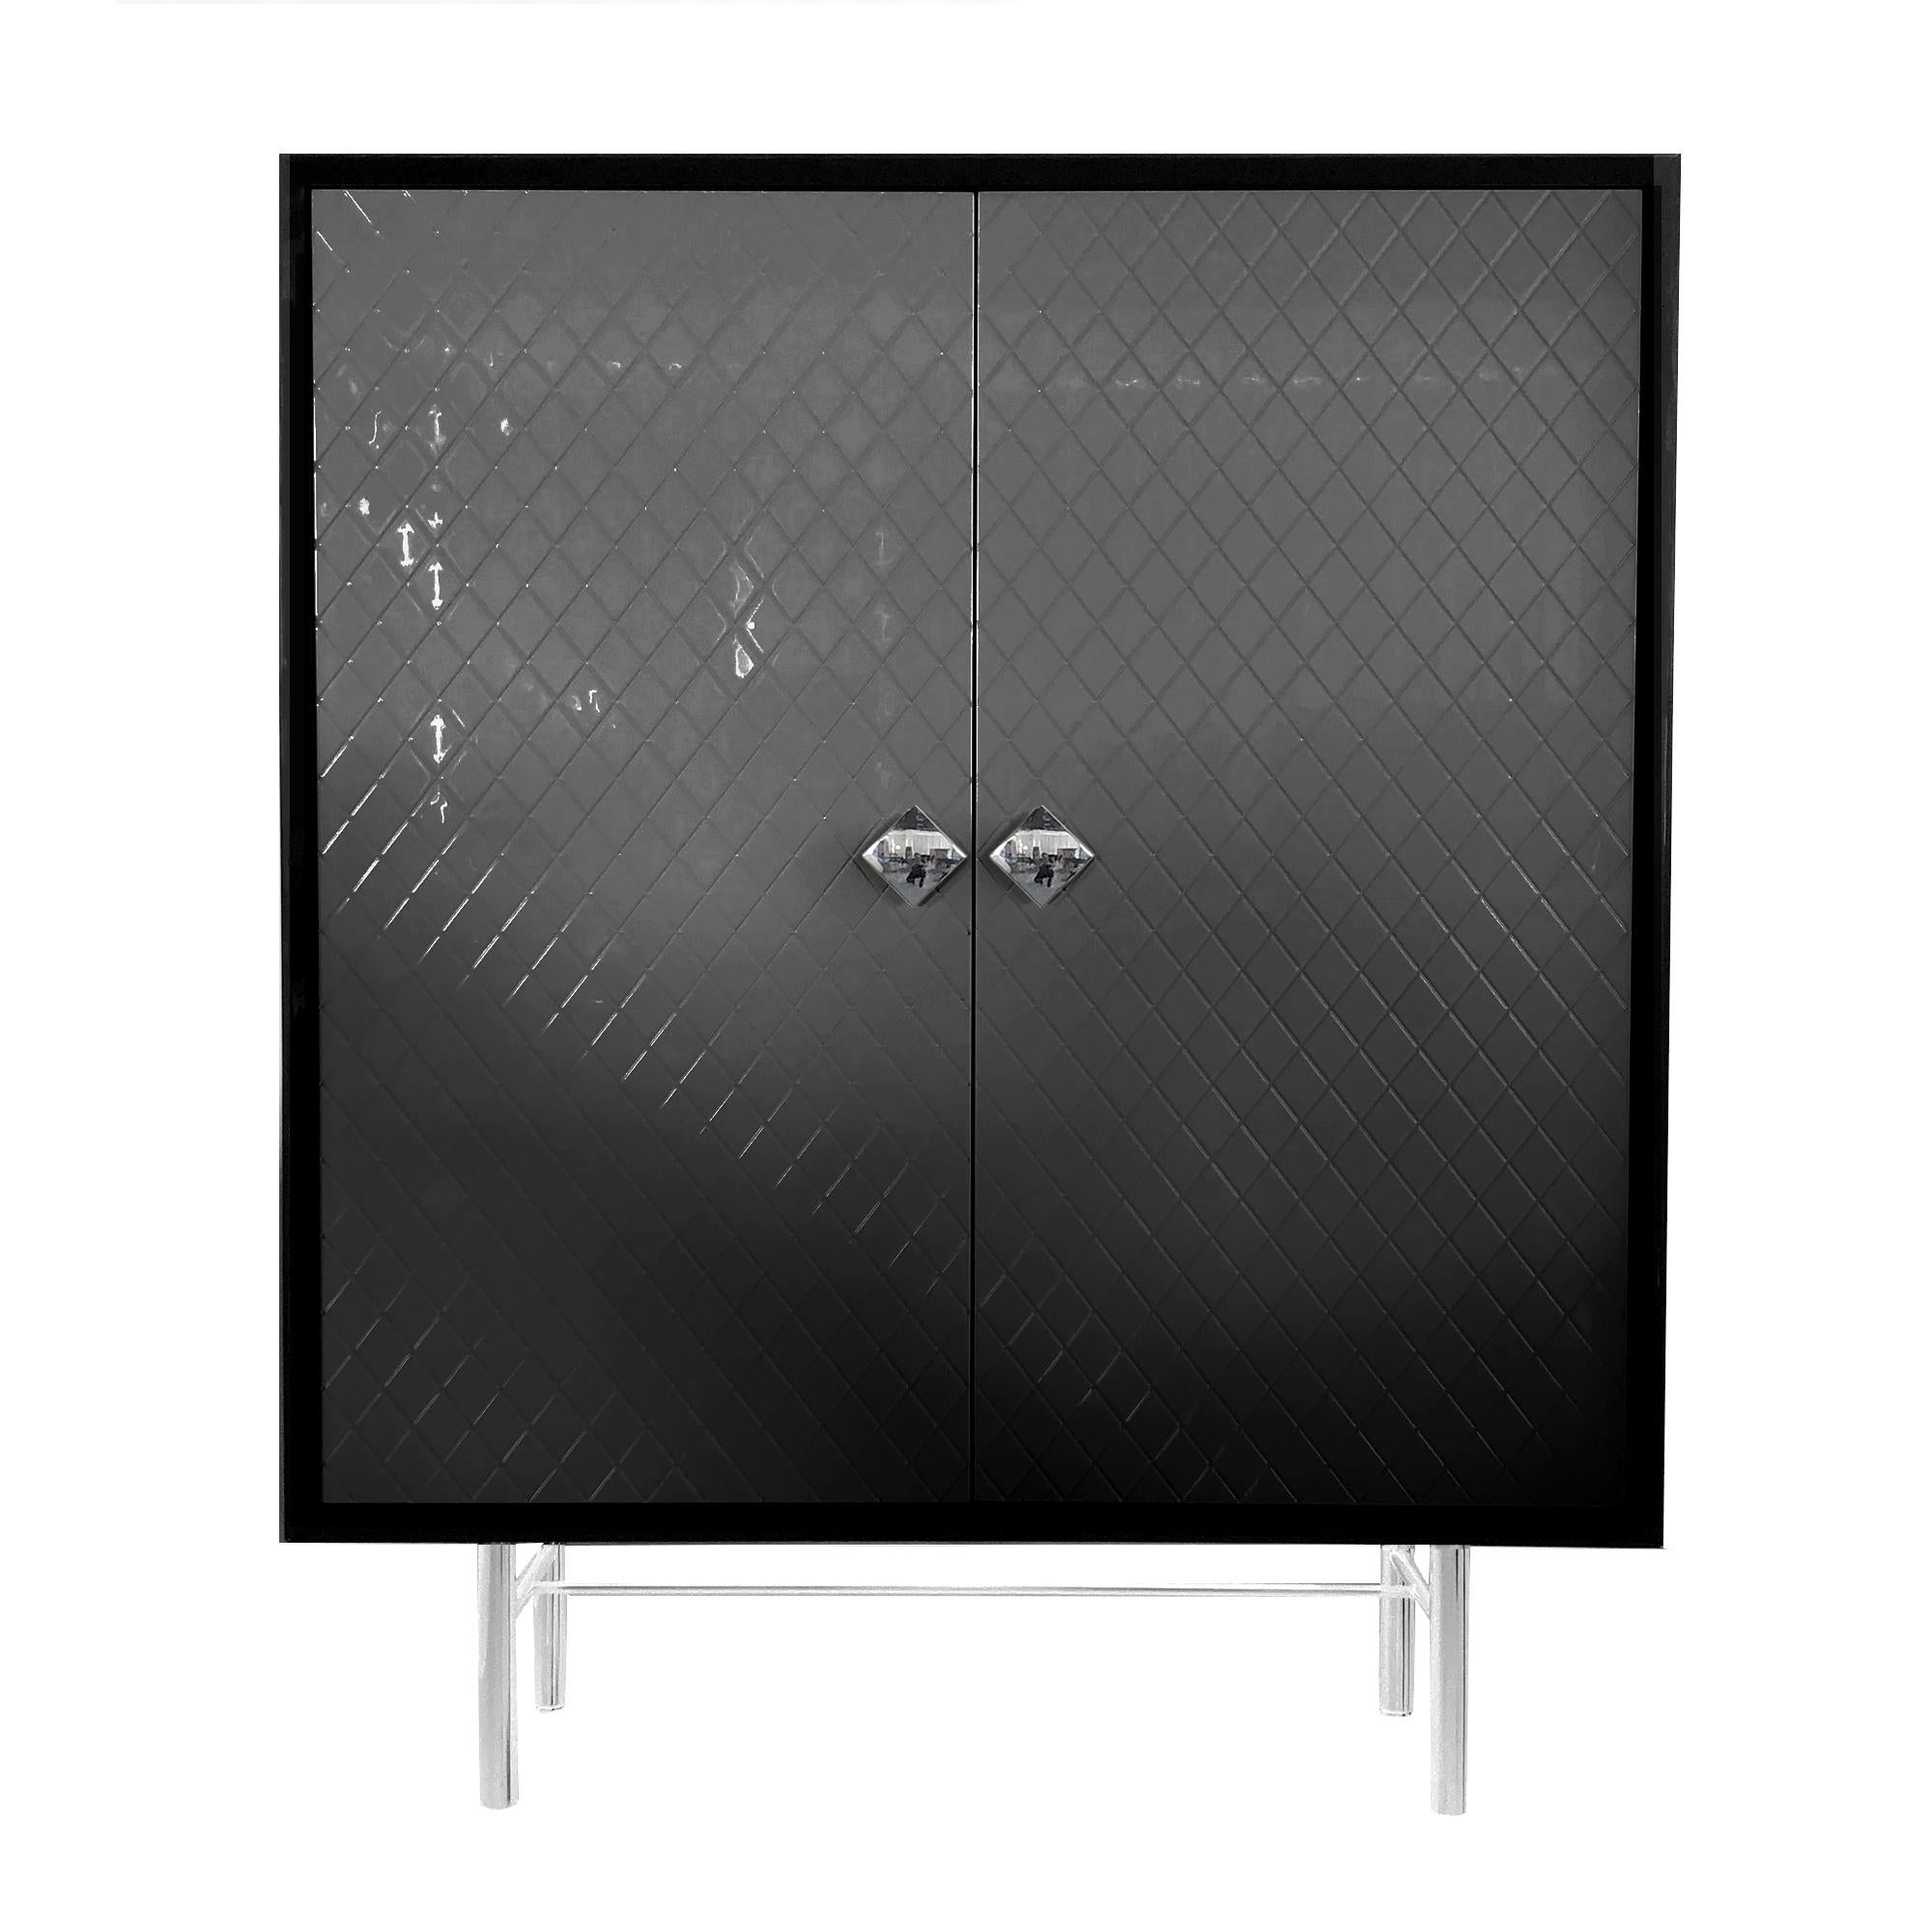 Spanish In Stock in Los Angeles, Black Quilted façon Chanel Lacquer Bar / Cabinet